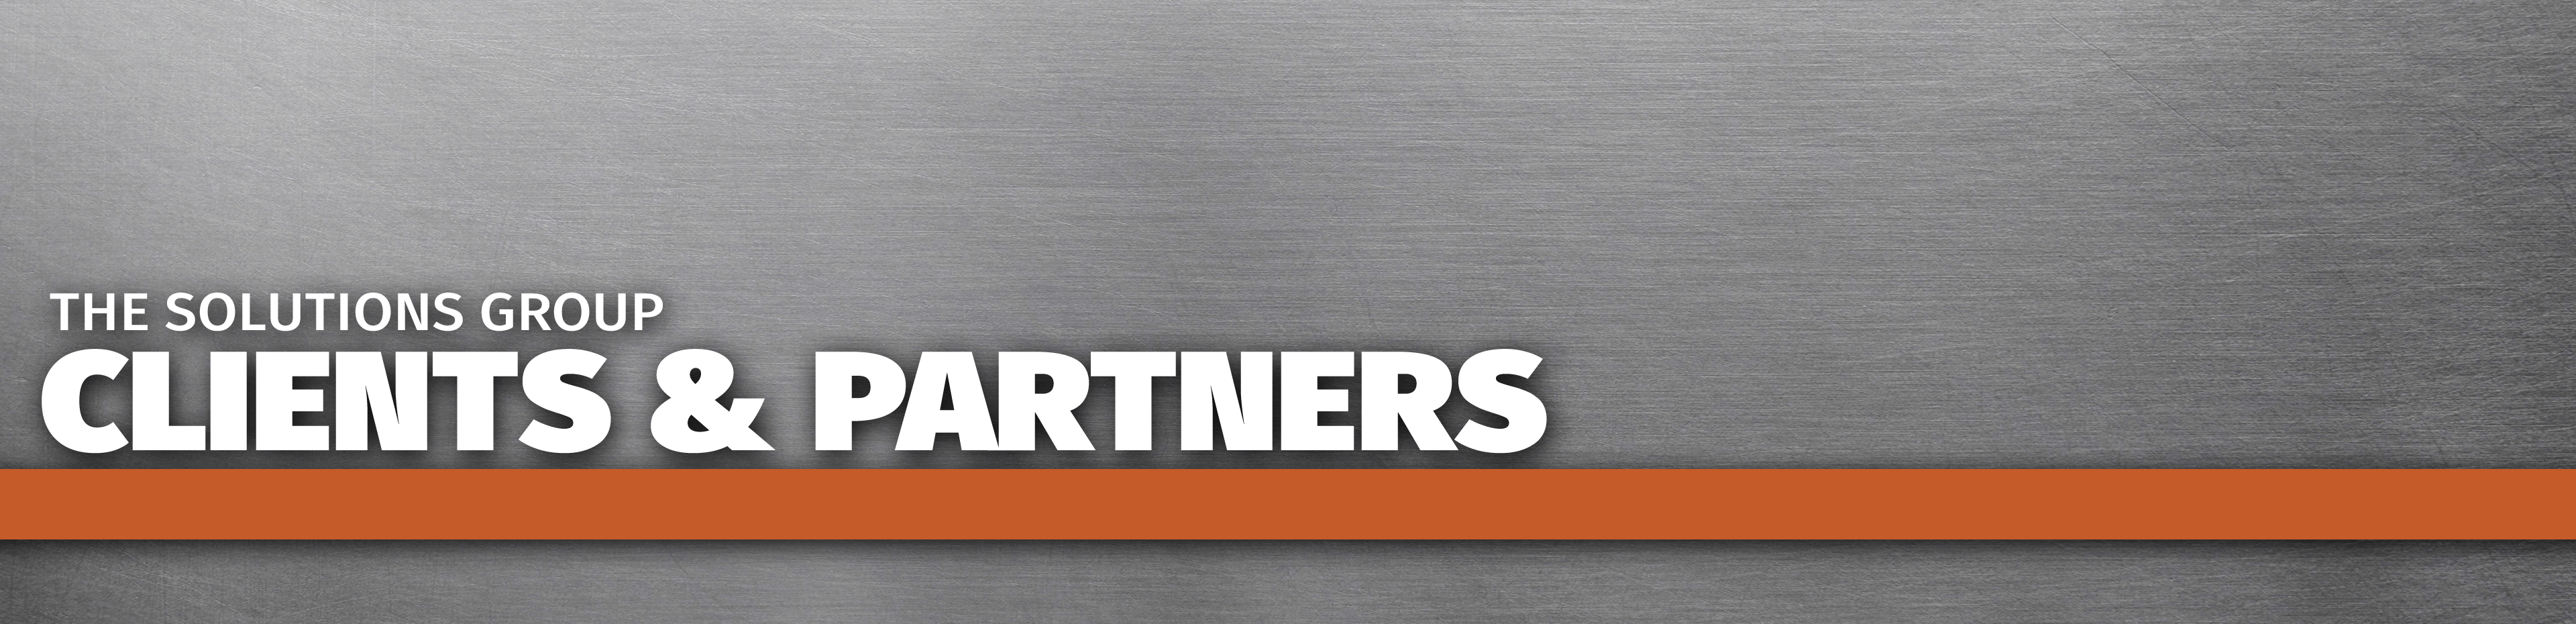 Clients and Partners Header